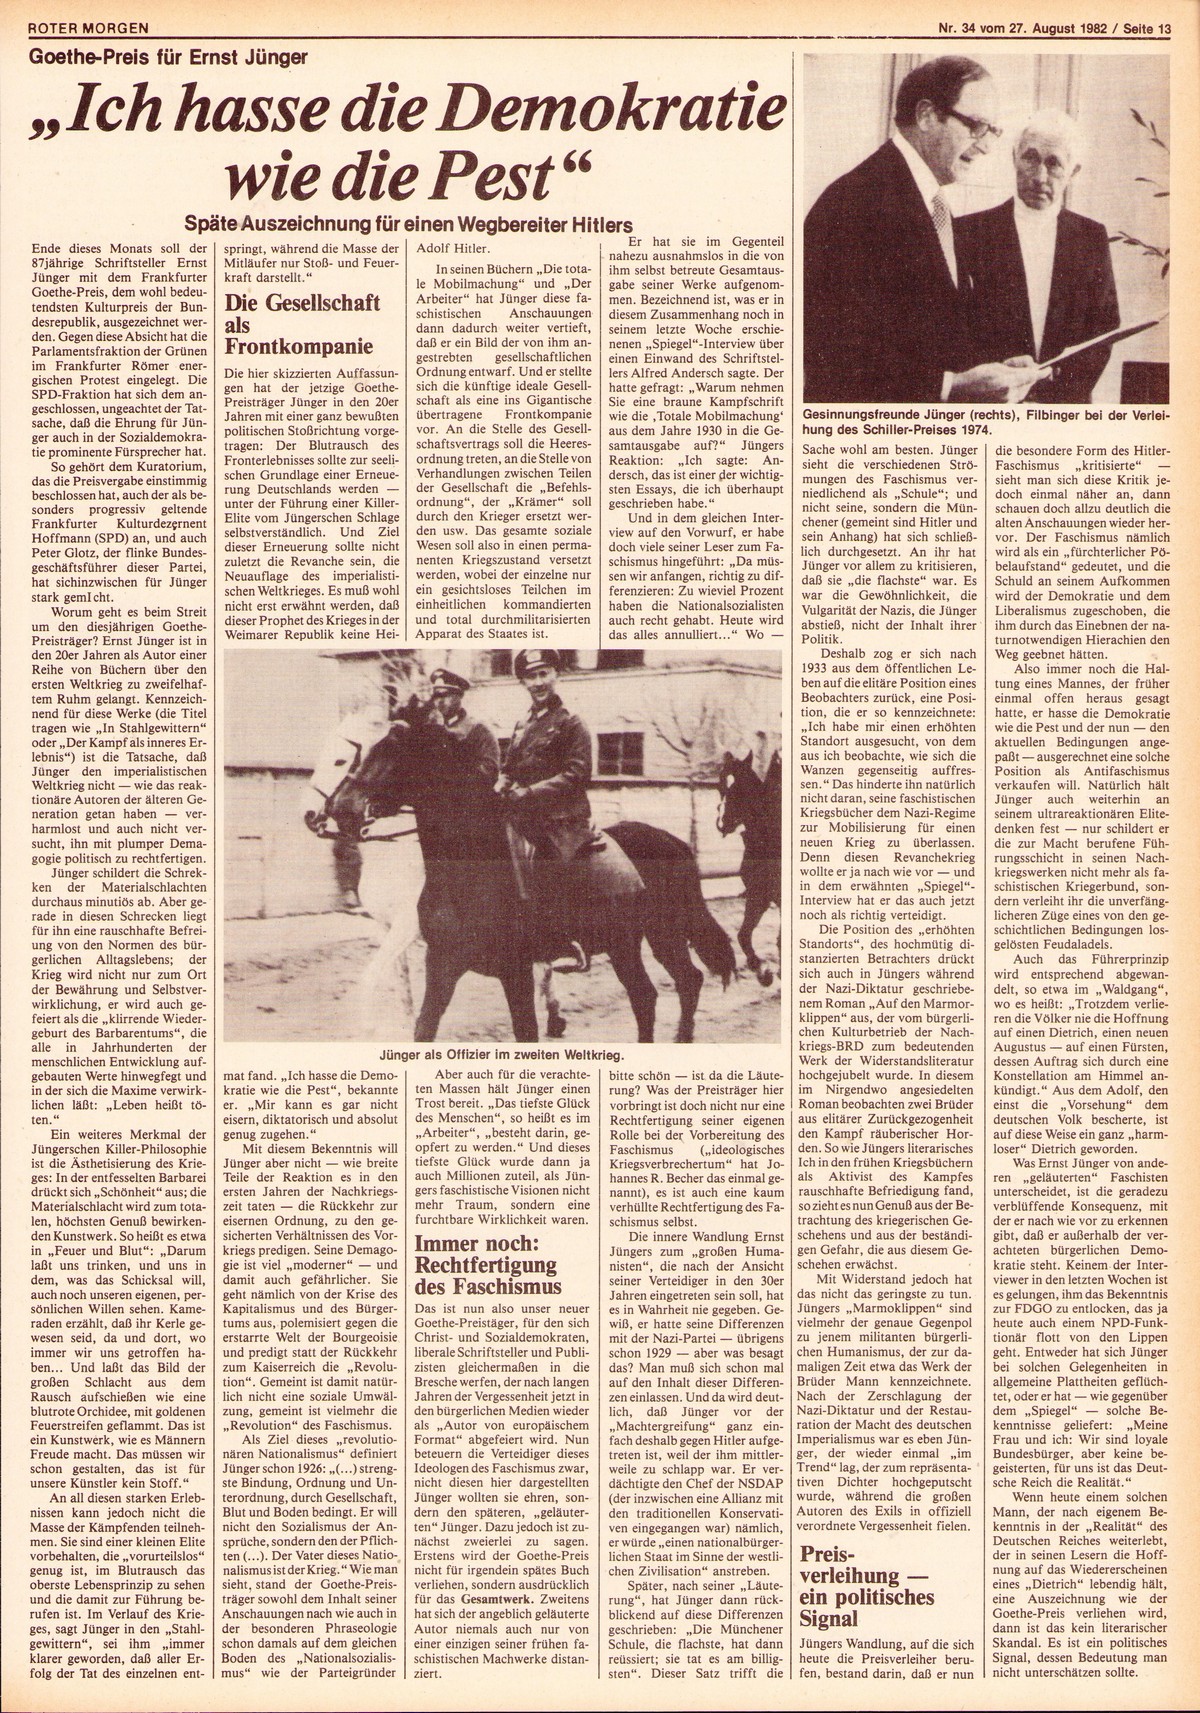 Roter Morgen, 16. Jg., 27. August 1982, Nr. 34, Seite 13